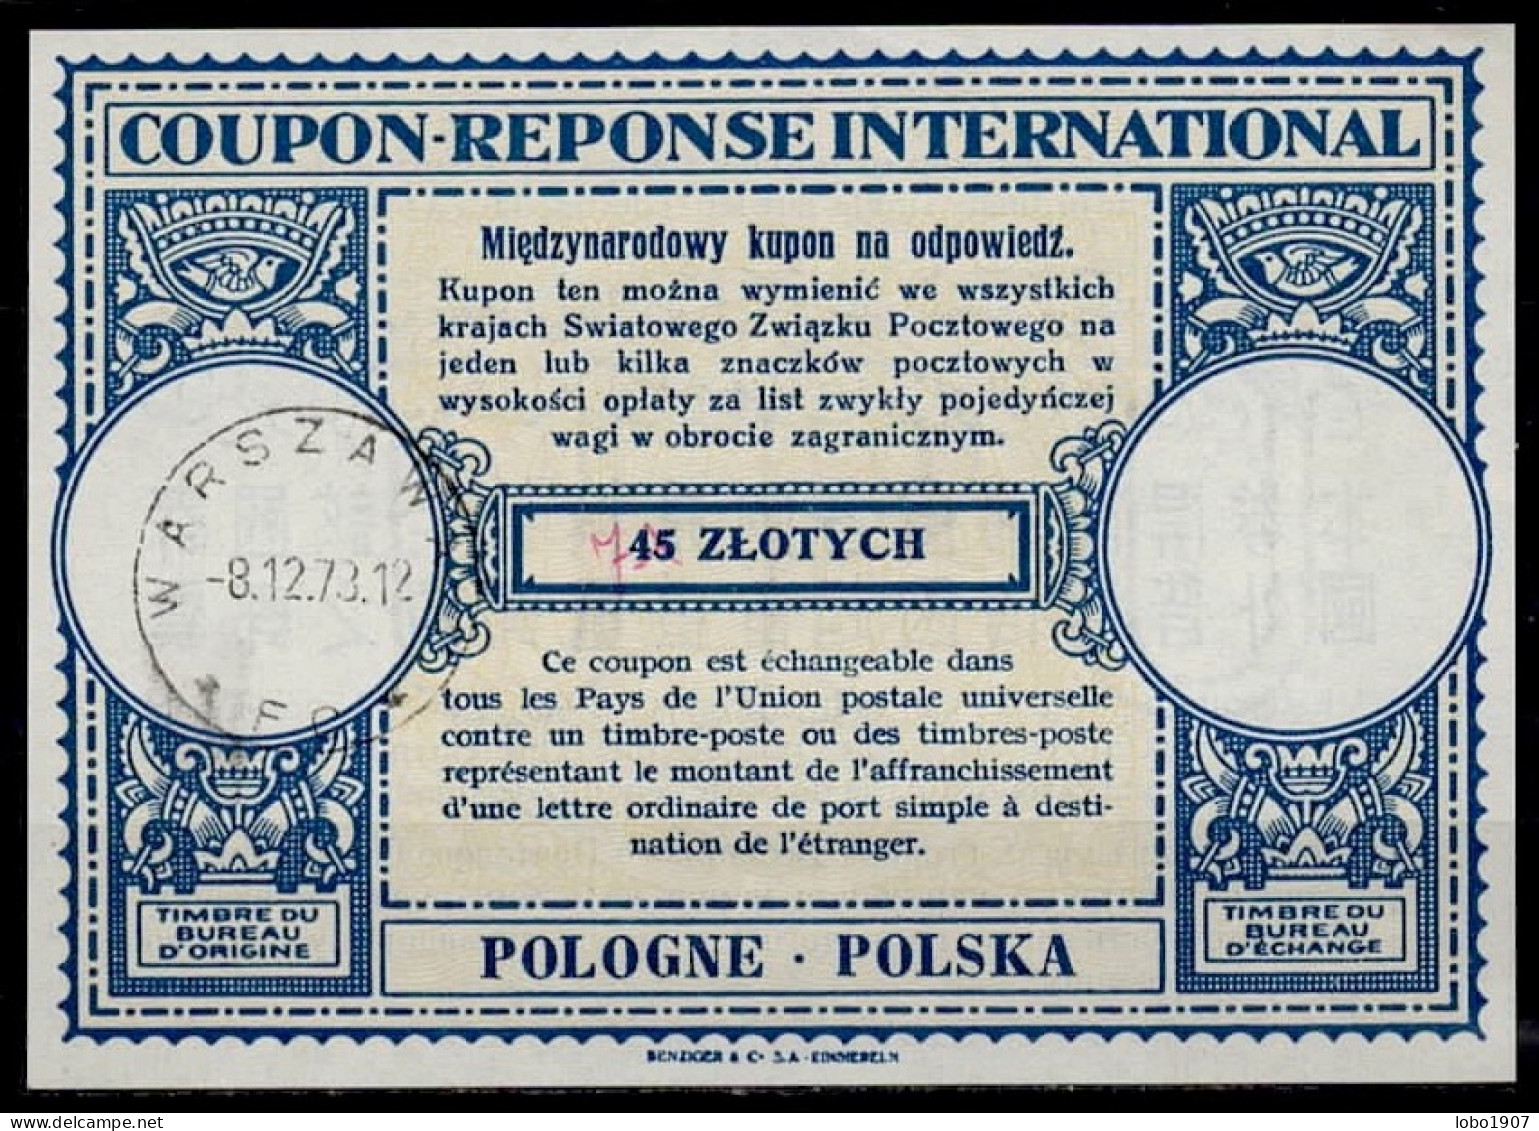 POLOGNE POLAND 1937-2023  Collection of 18 International Reply Coupon Reponse Antwortschein IRC IAS  see list and scans